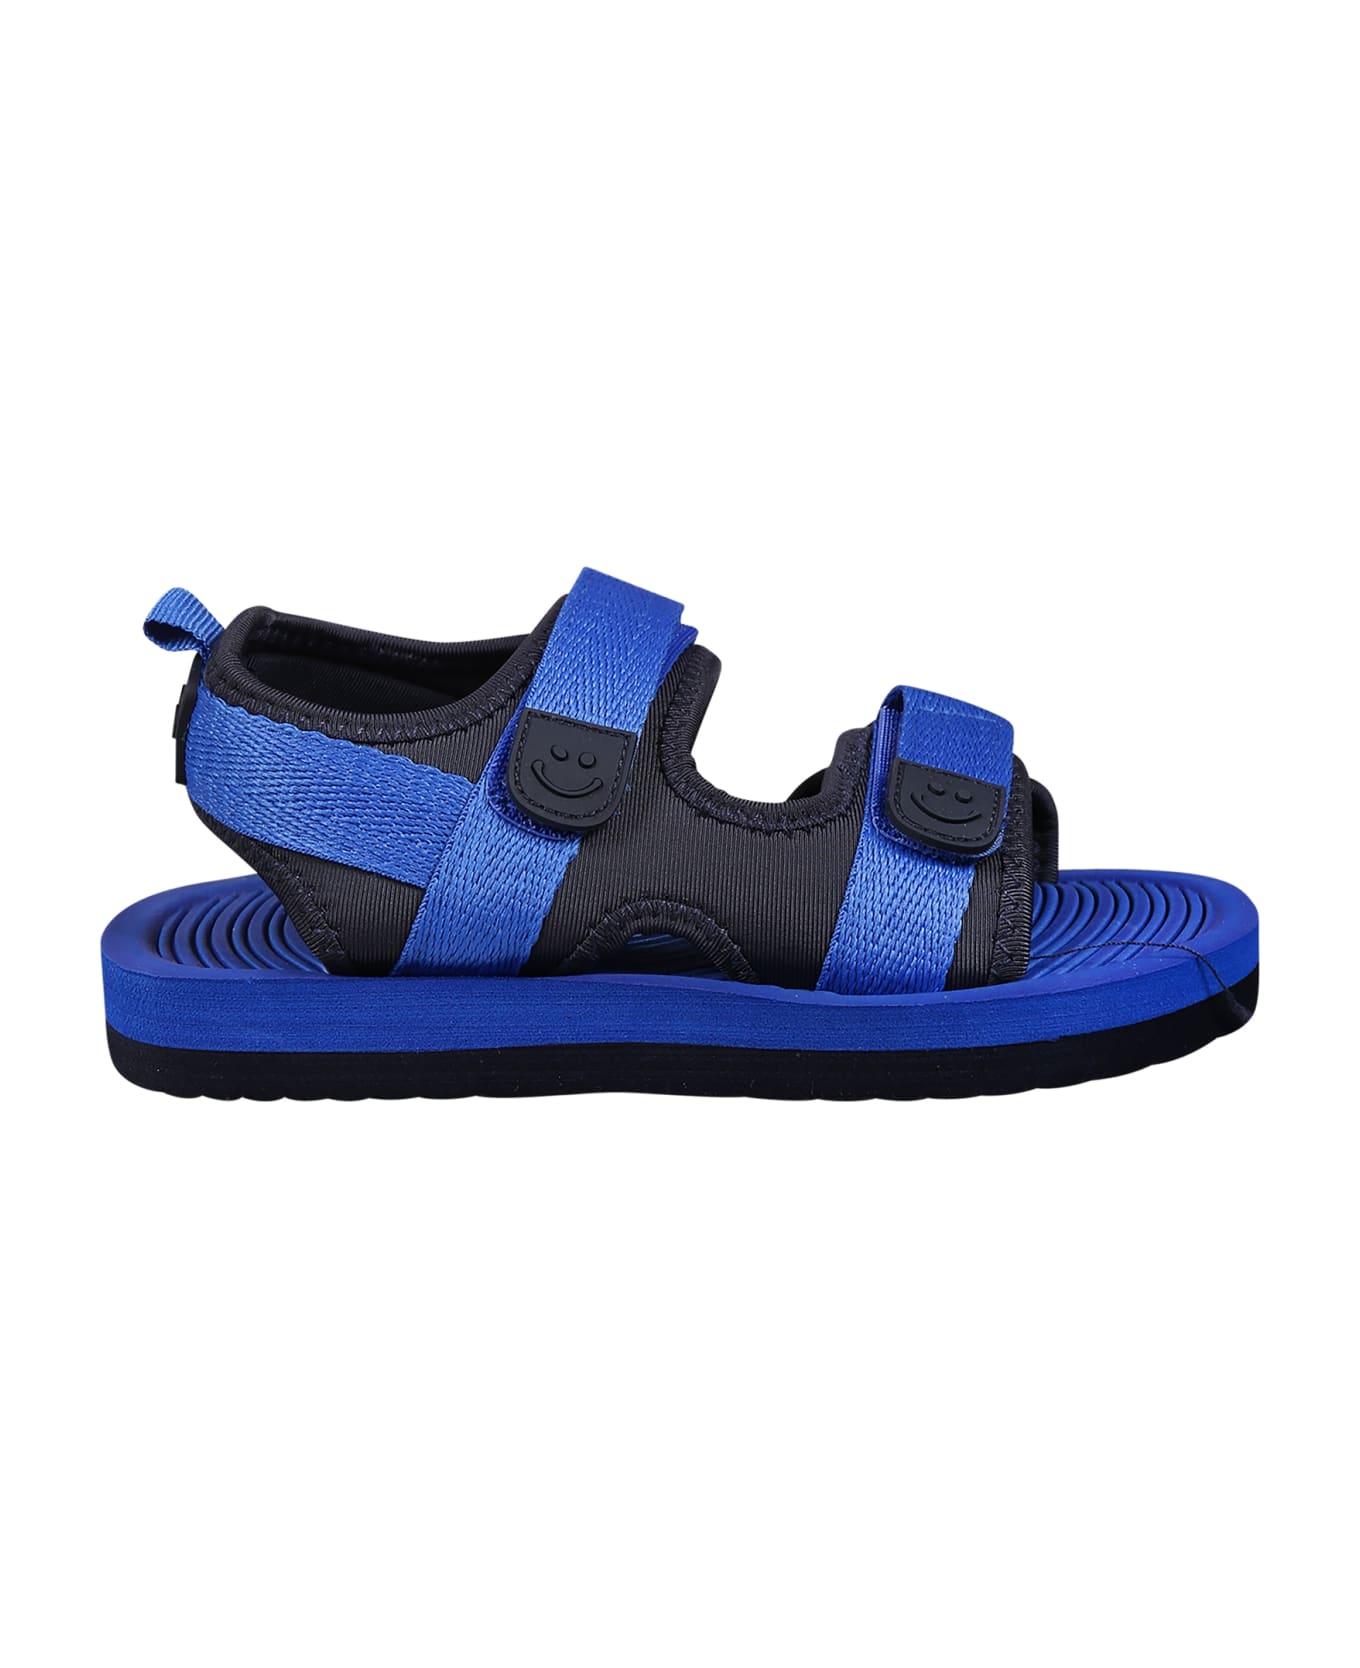 Molo Blue Sandals For Boy With Logo - Blue シューズ